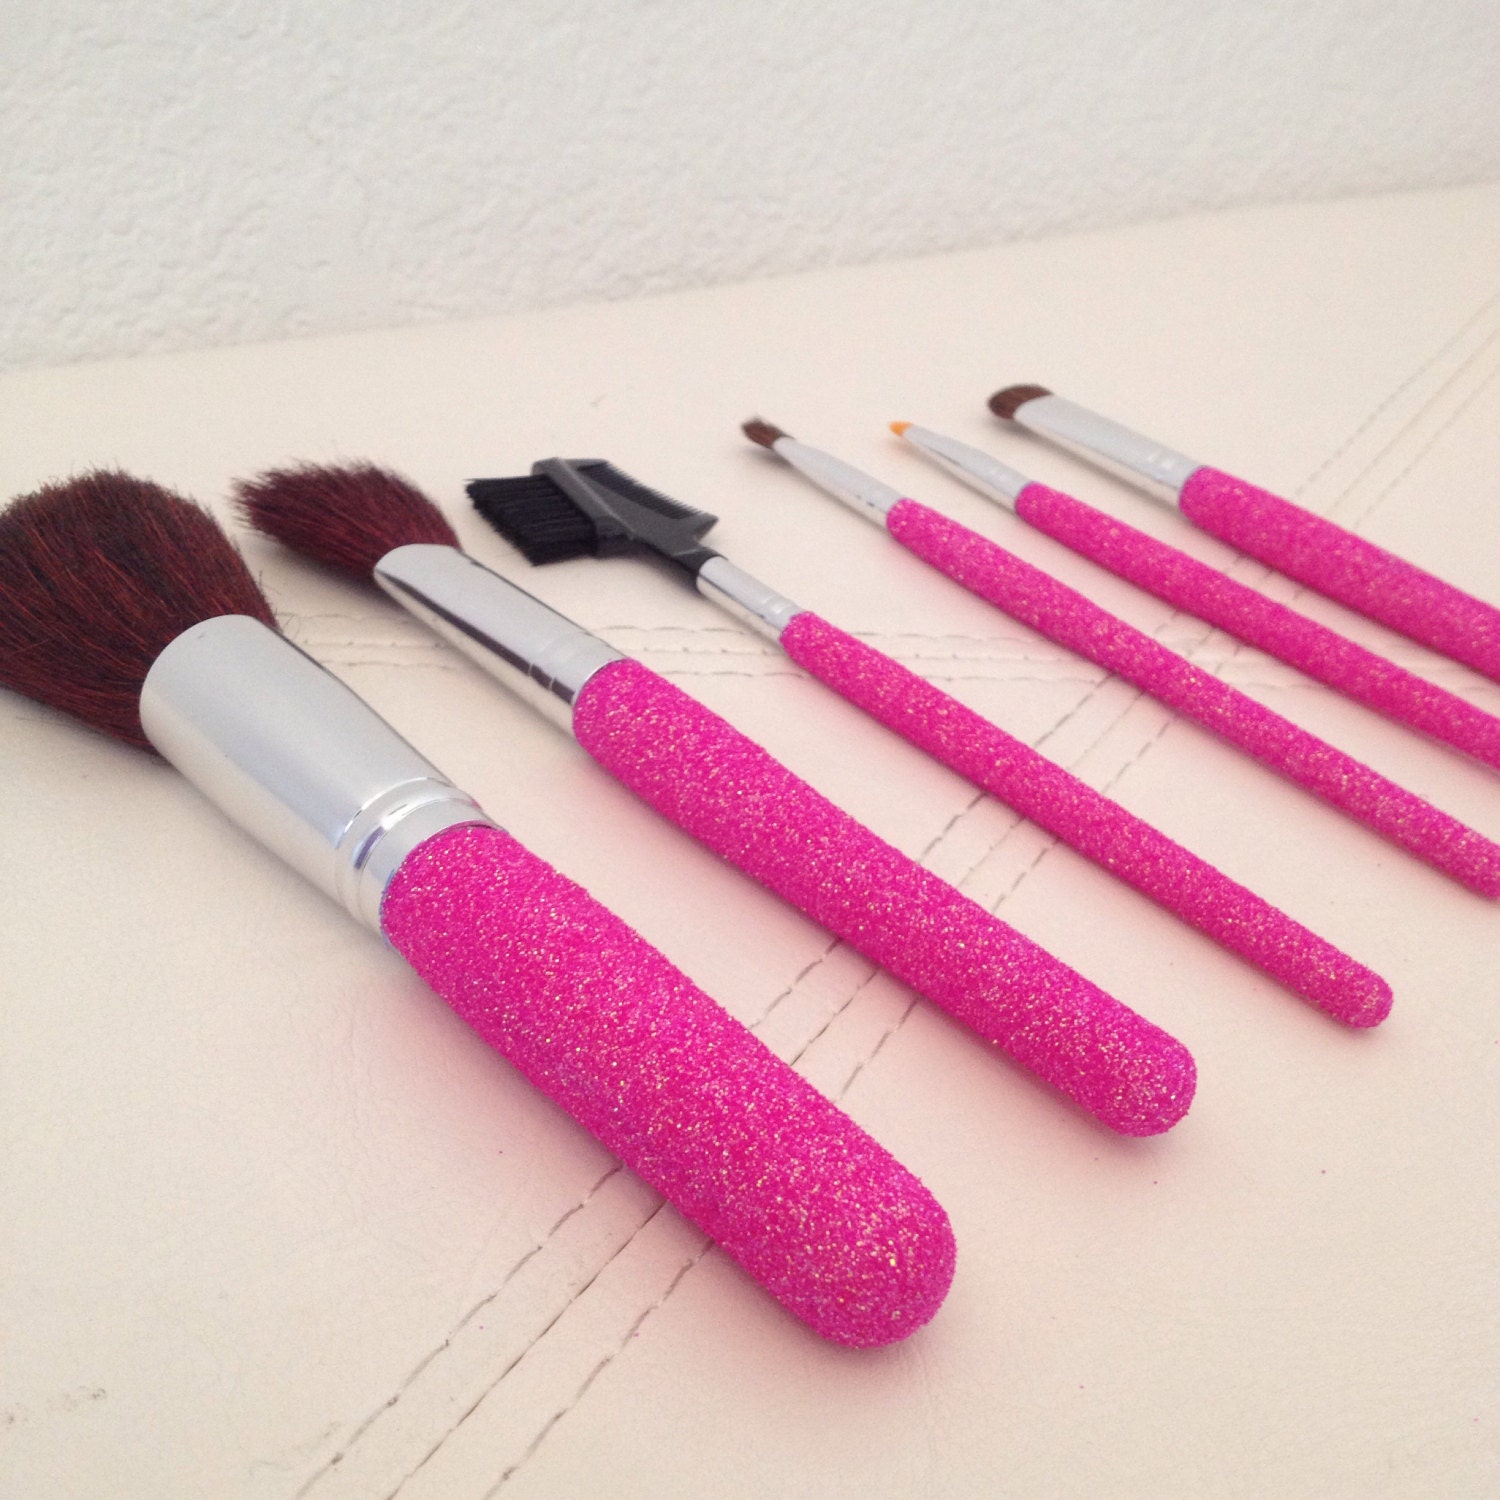 Makeup brushes with glitter